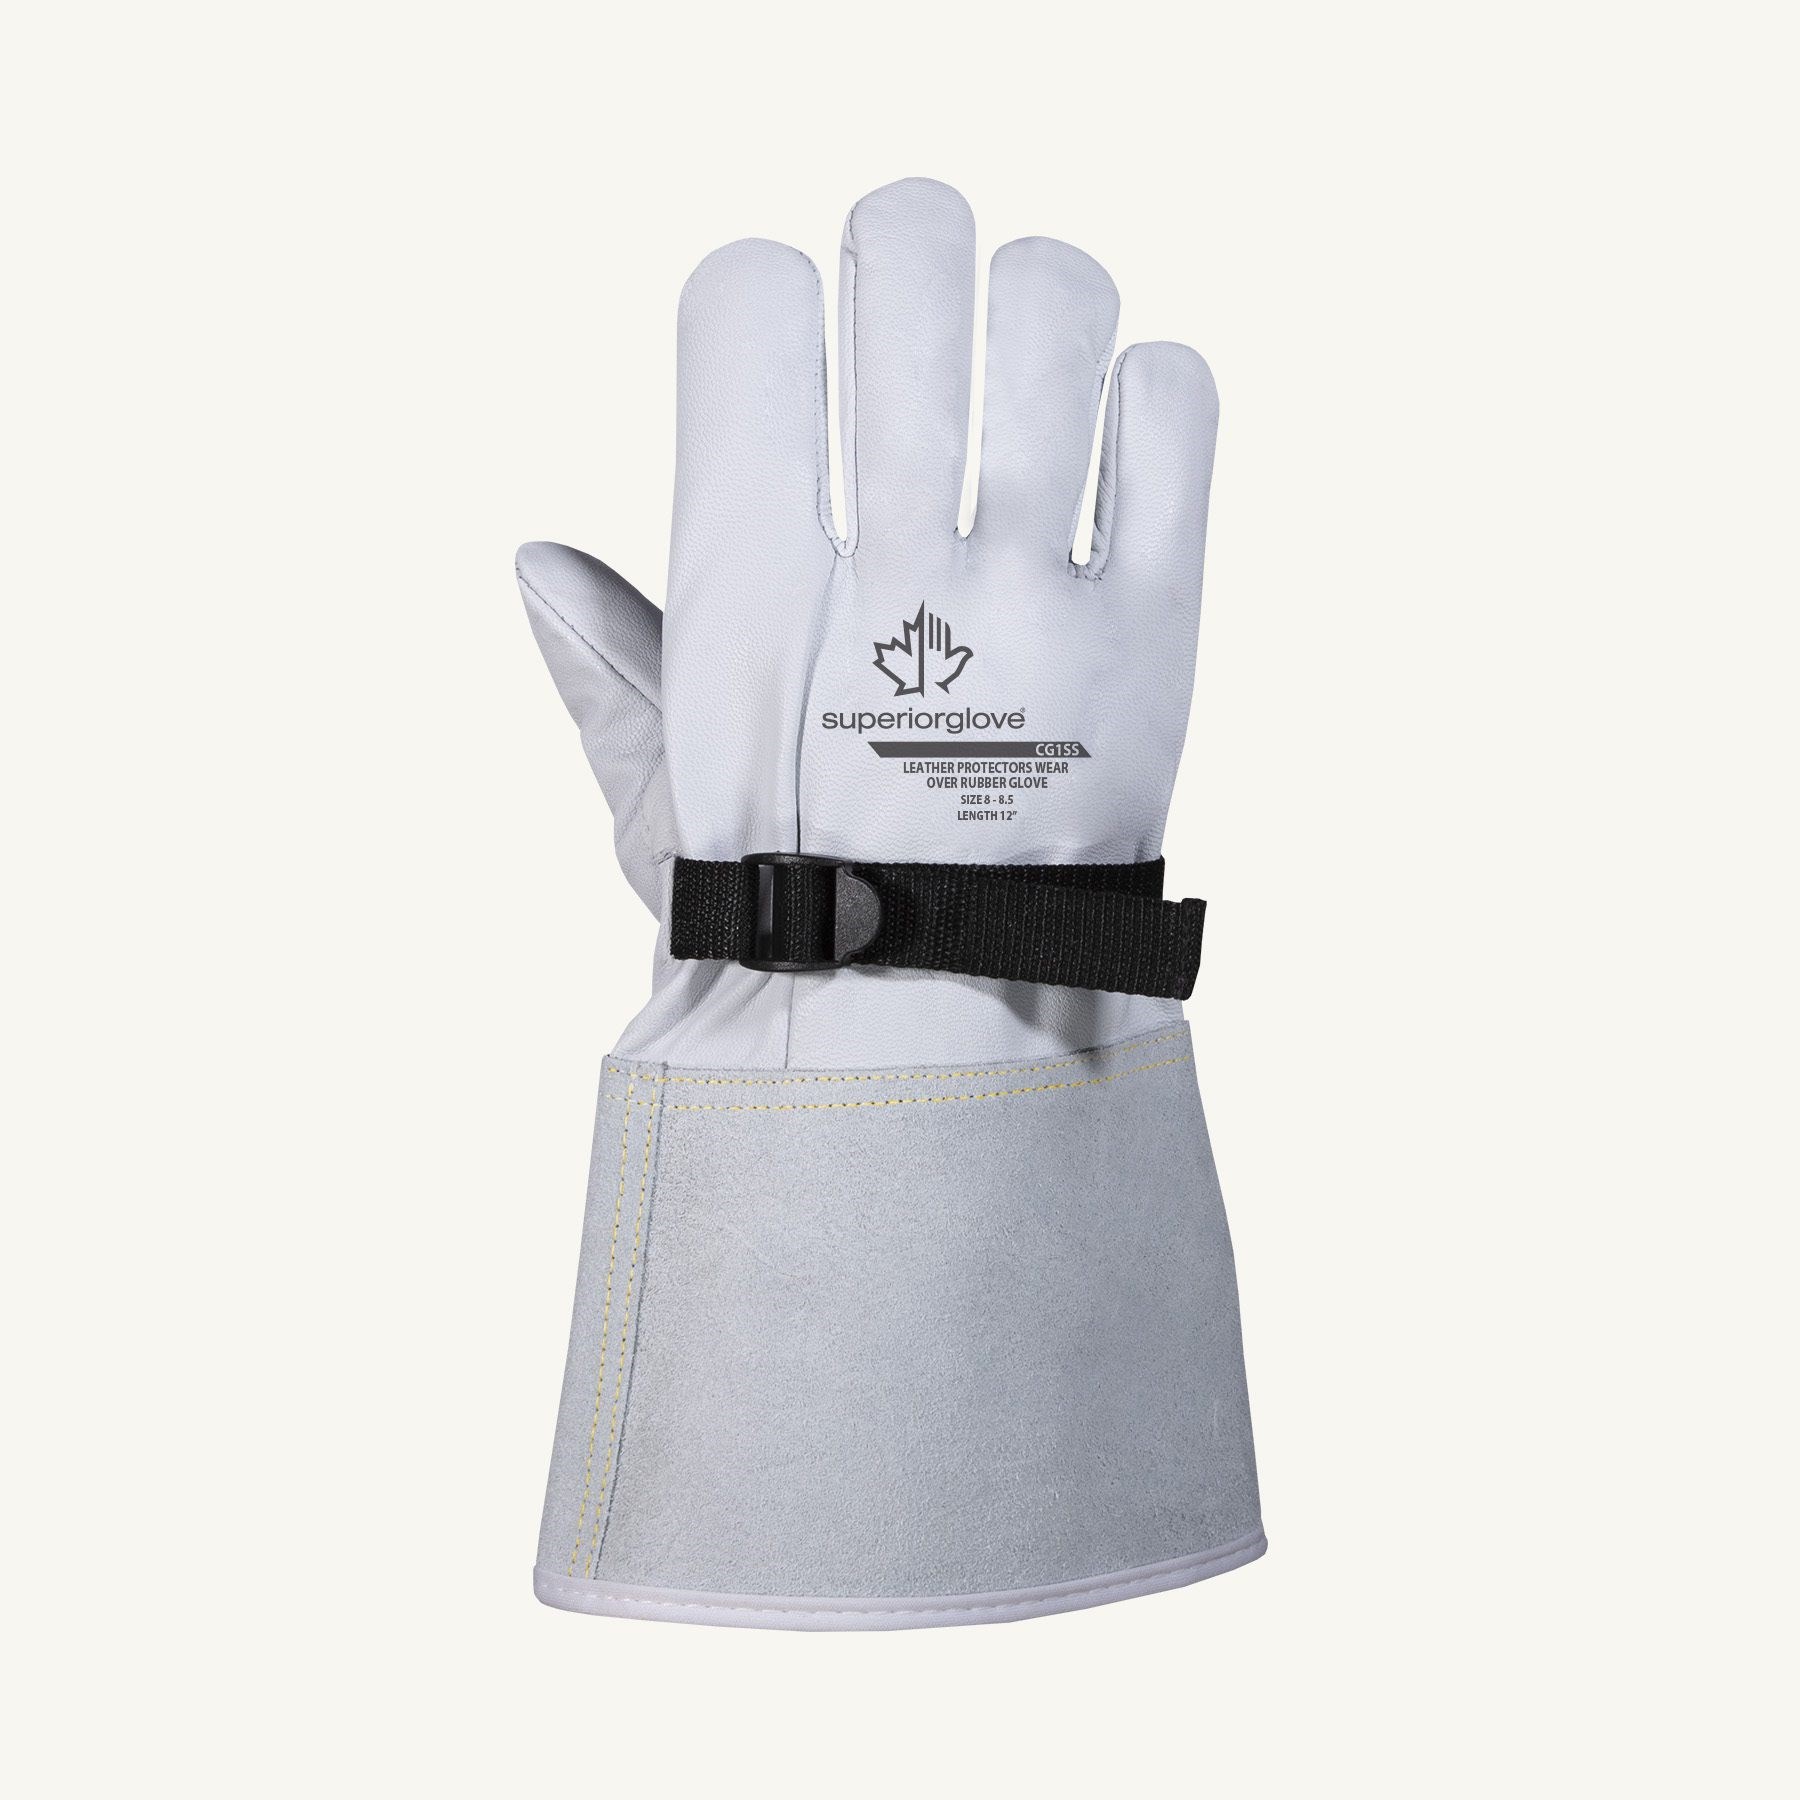 10 Best Electrician Gloves on the Market Today